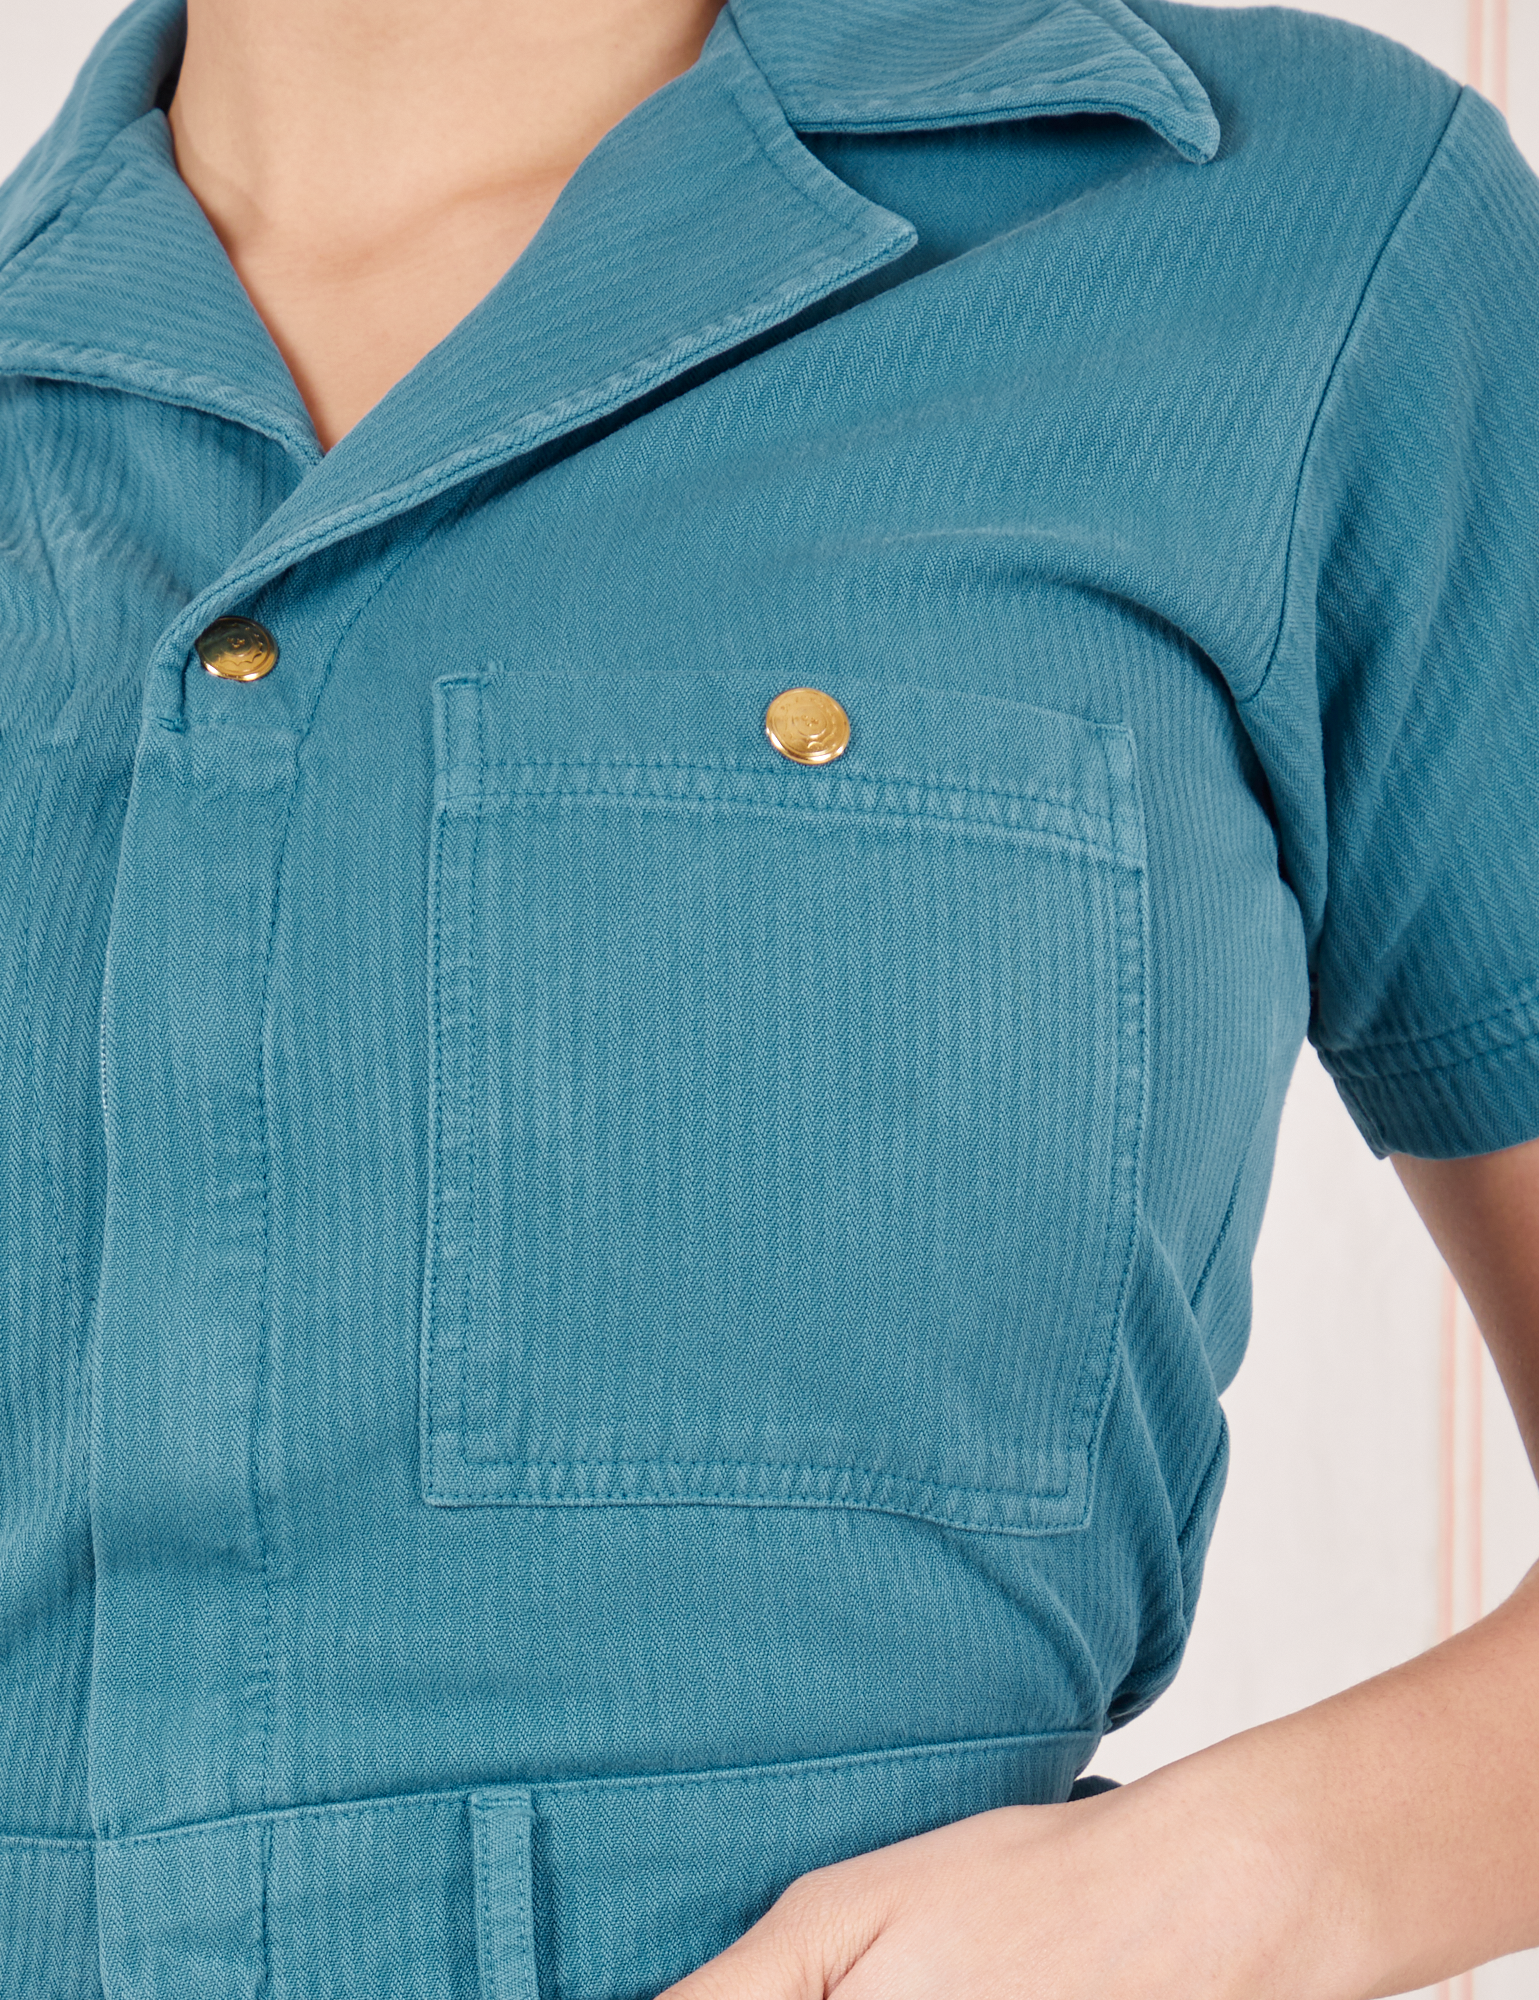 Front pocket close up of Heritage Short Sleeve Jumpsuit in Marine Blue worn by Tiara